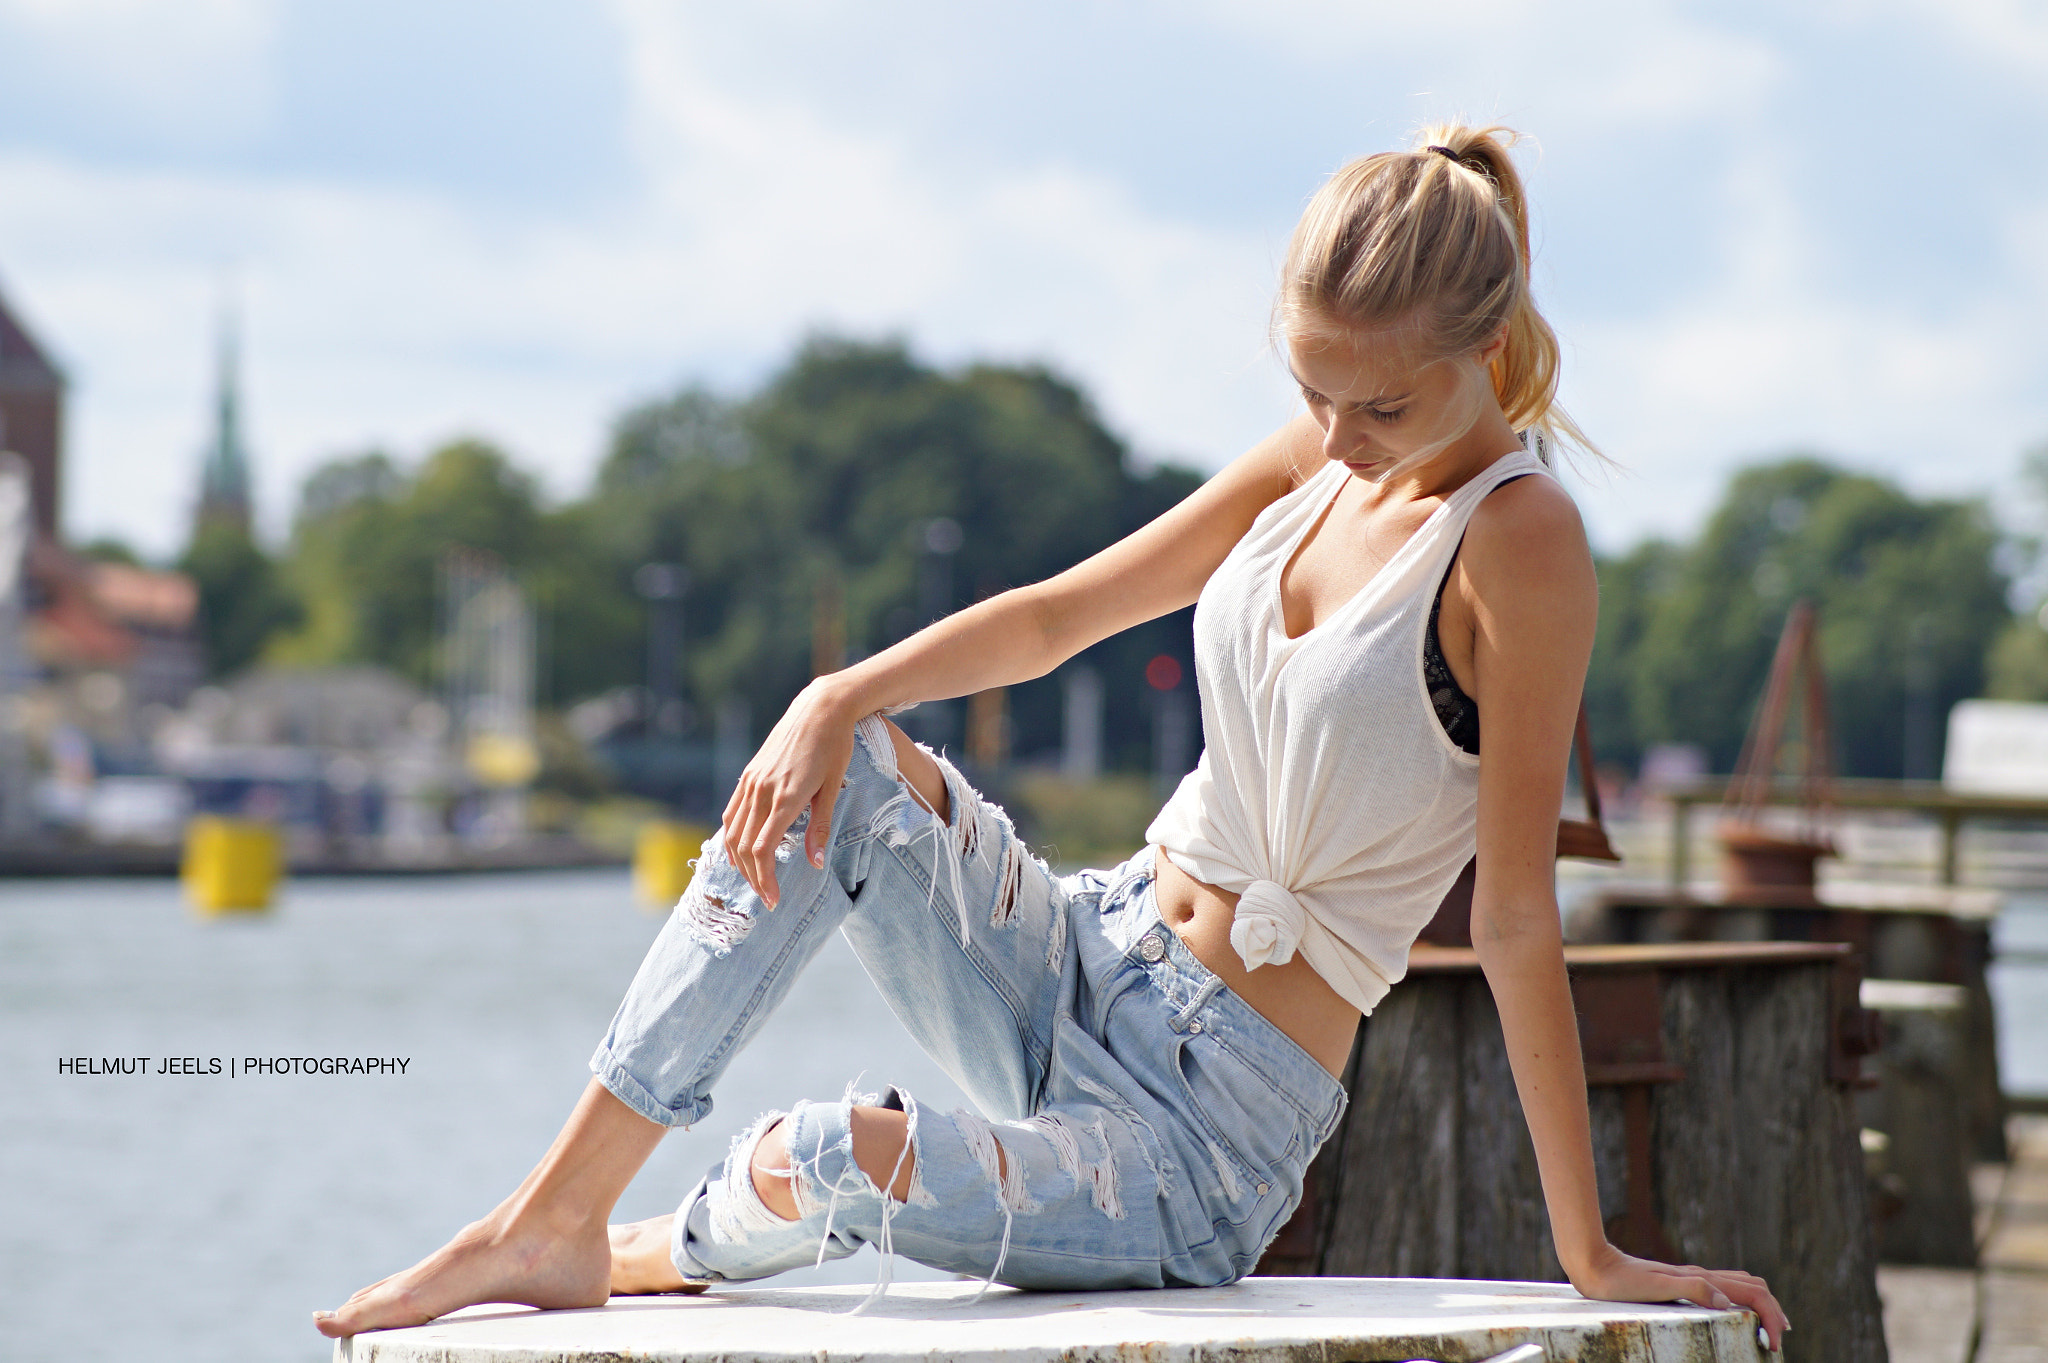 People 2048x1363 torn jeans barefoot women model ponytail